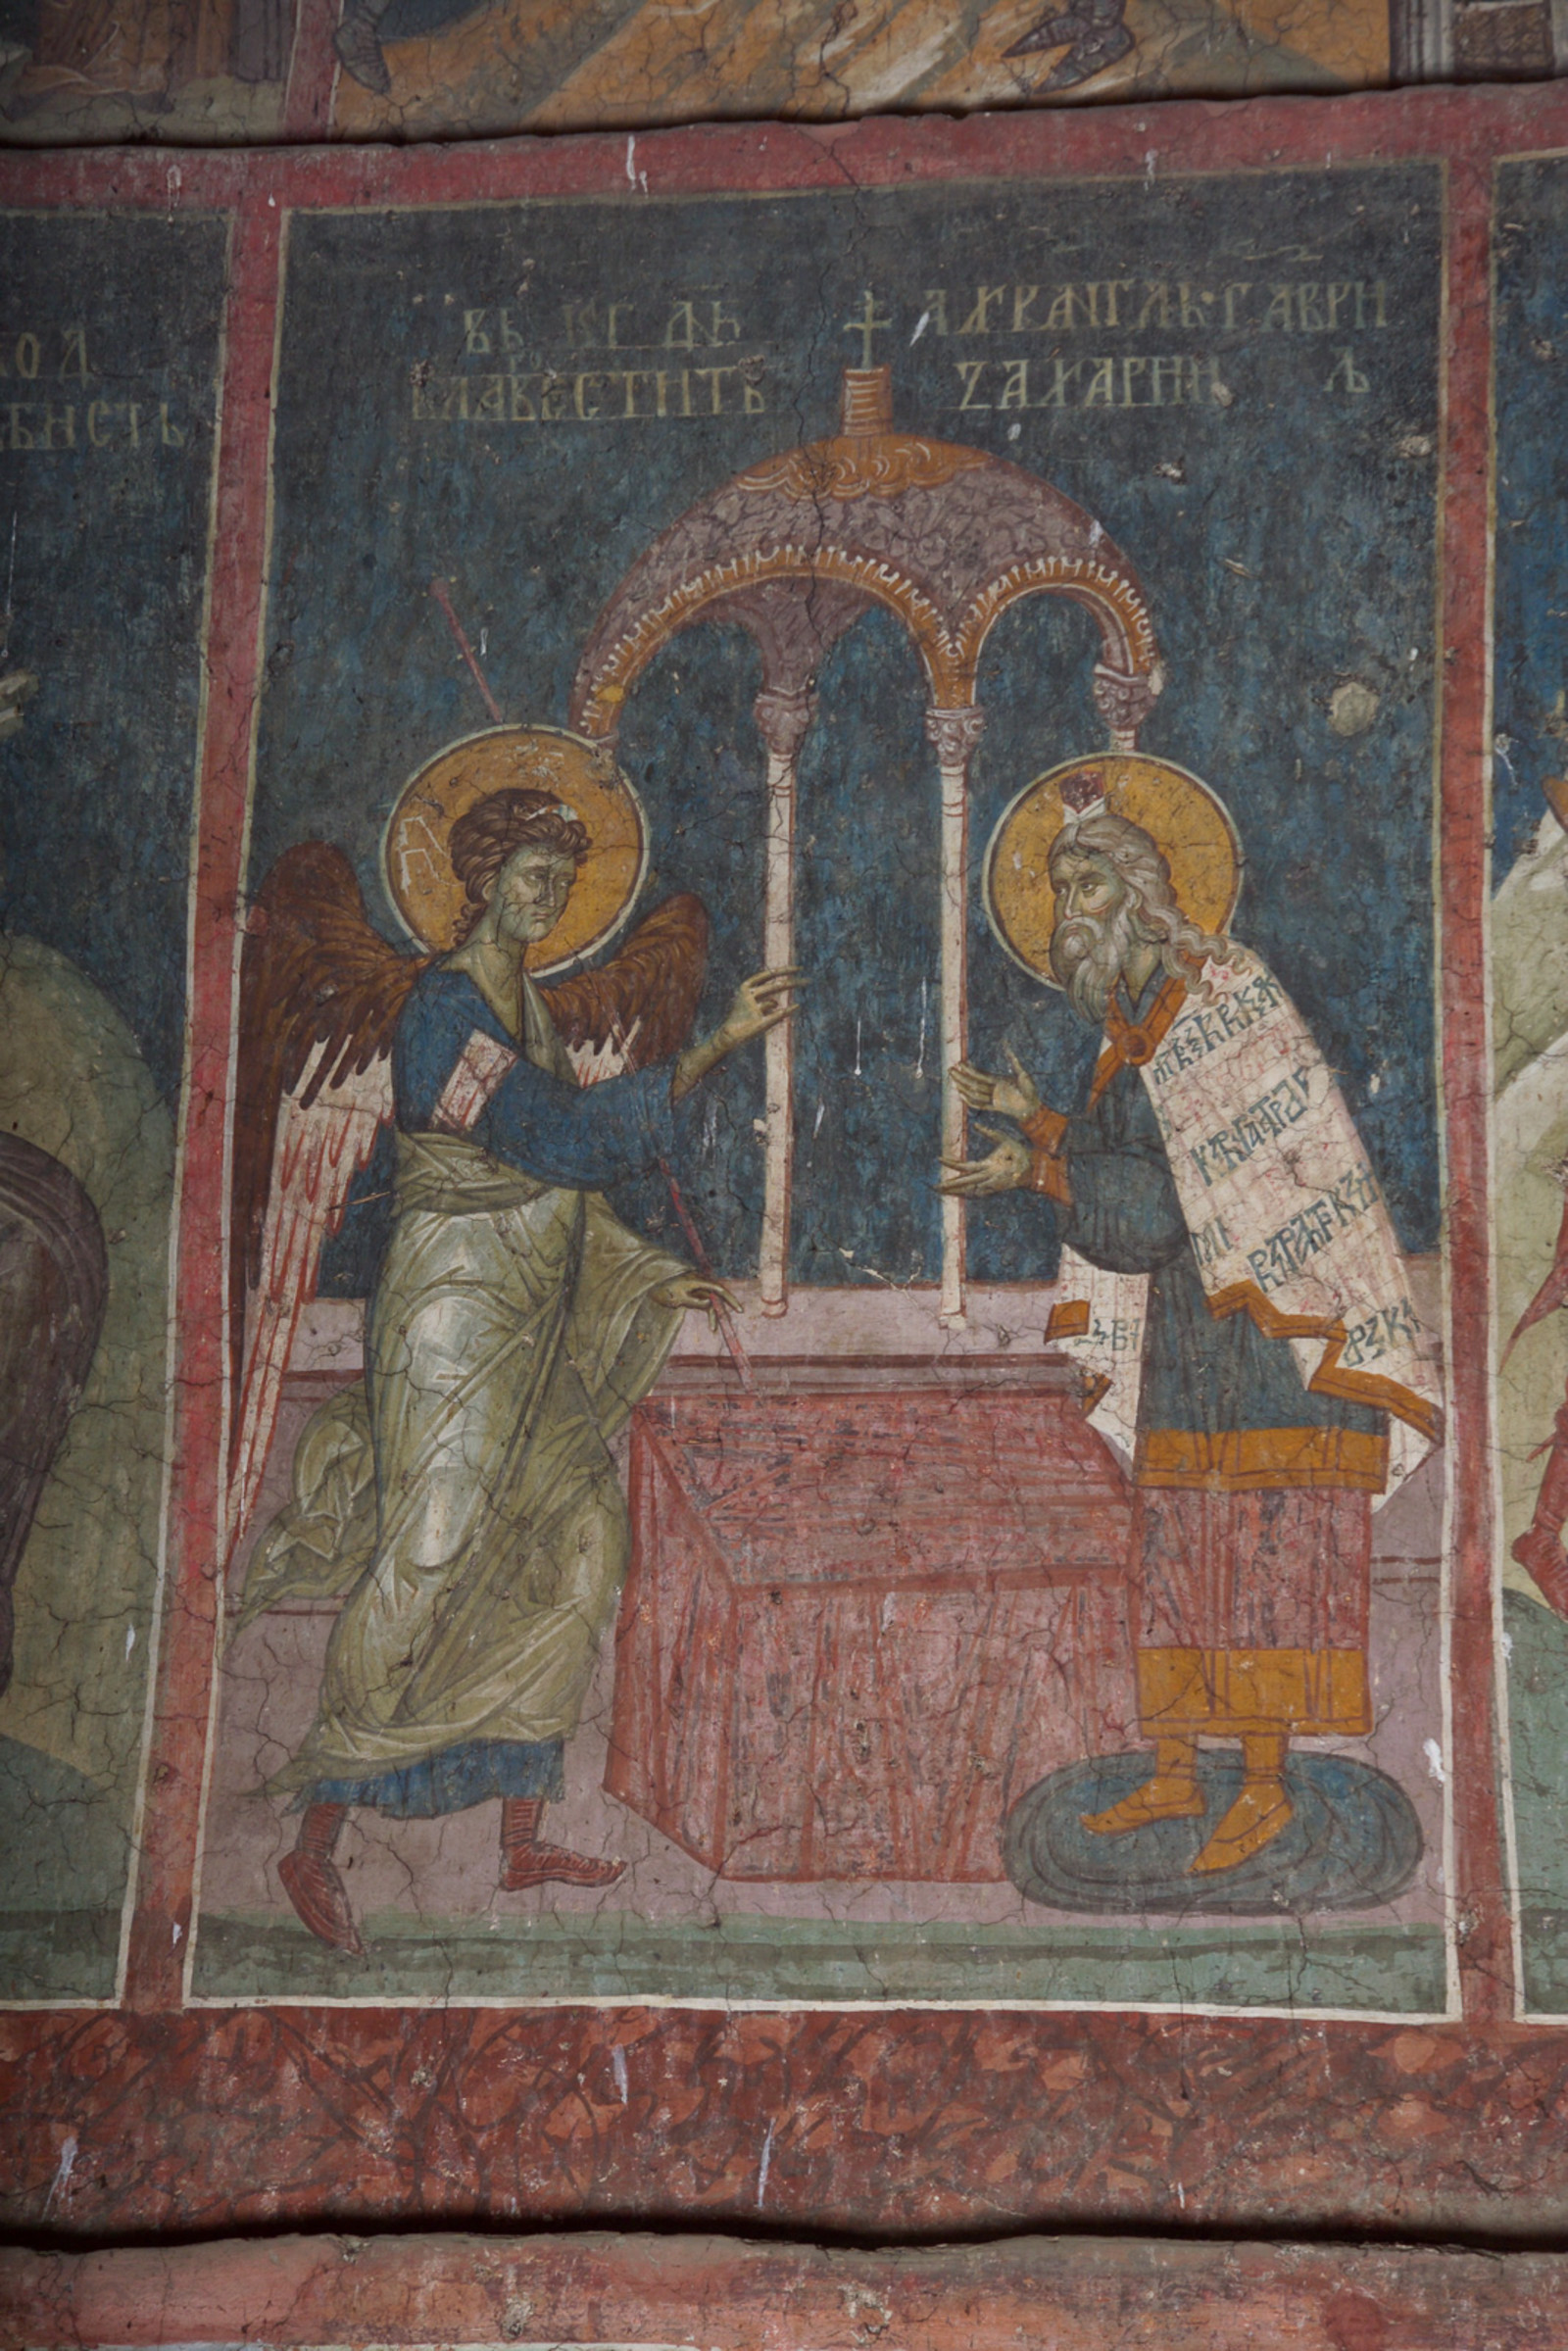 7I-5 September 23 - The Annunciation to Zacharias (scene)